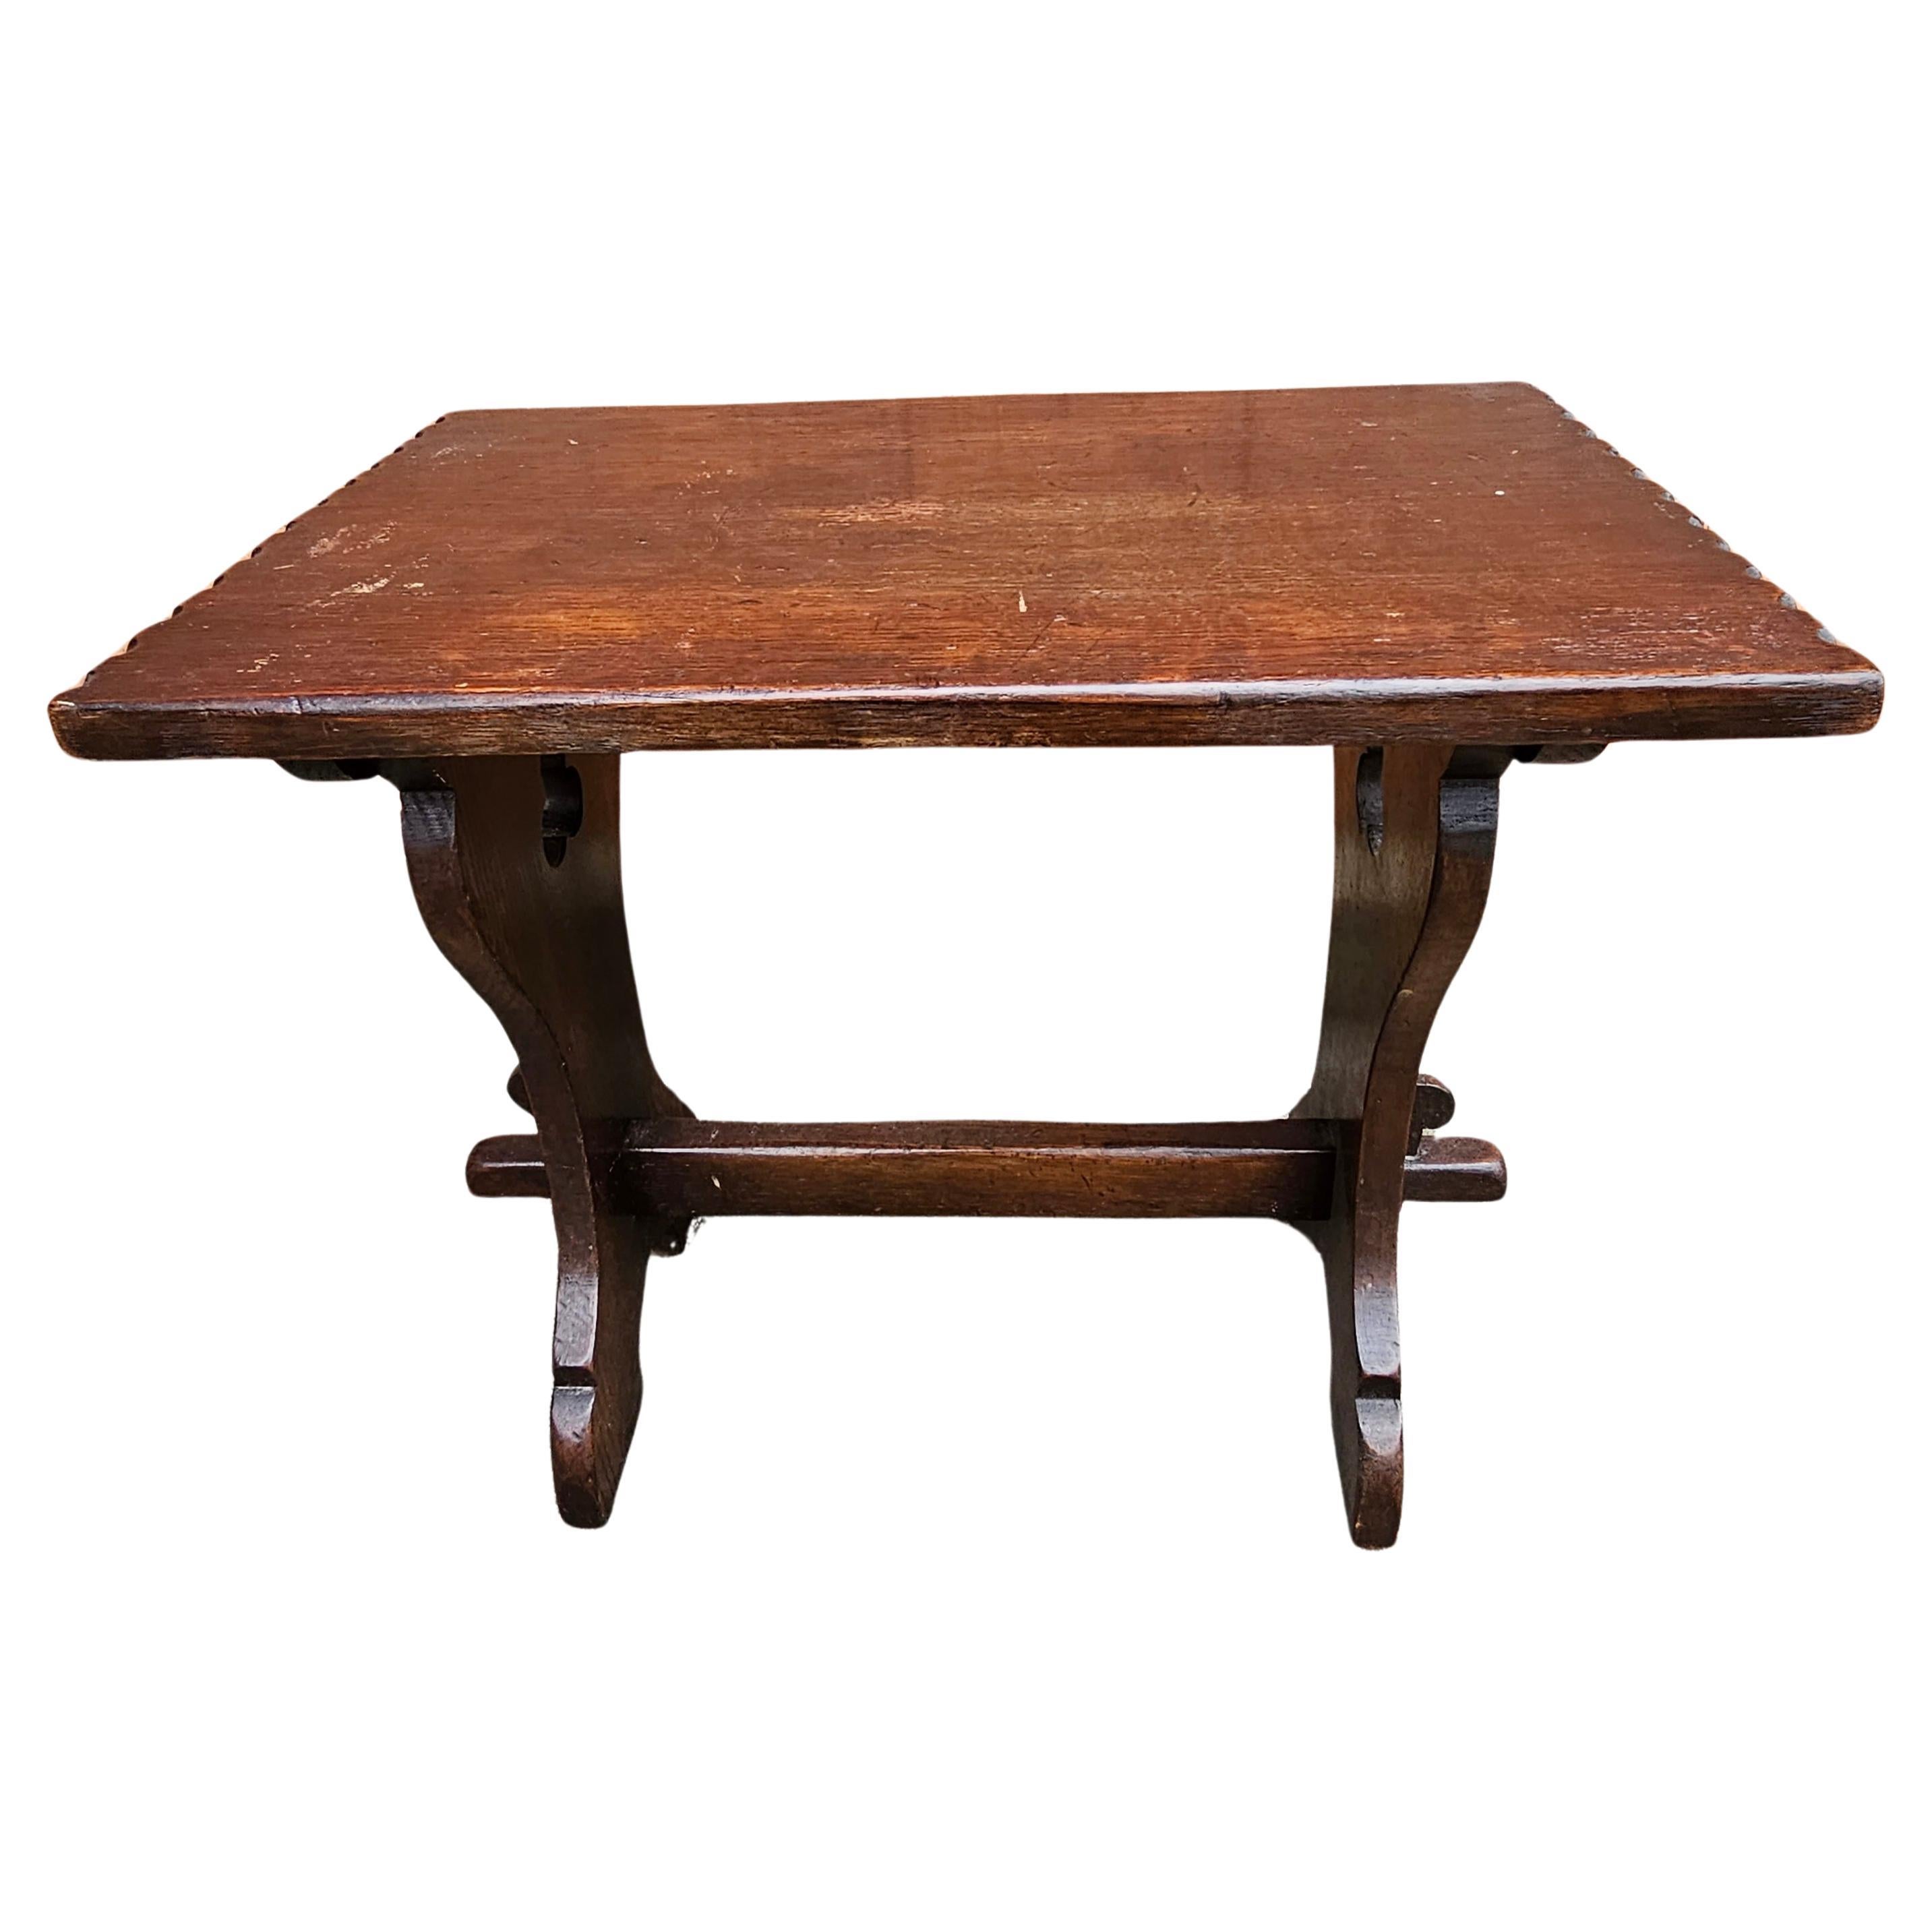 An Early American Oak Trestle Side Table or bench in very stable condition. 
Solid hand crafted table. Measures 20.5